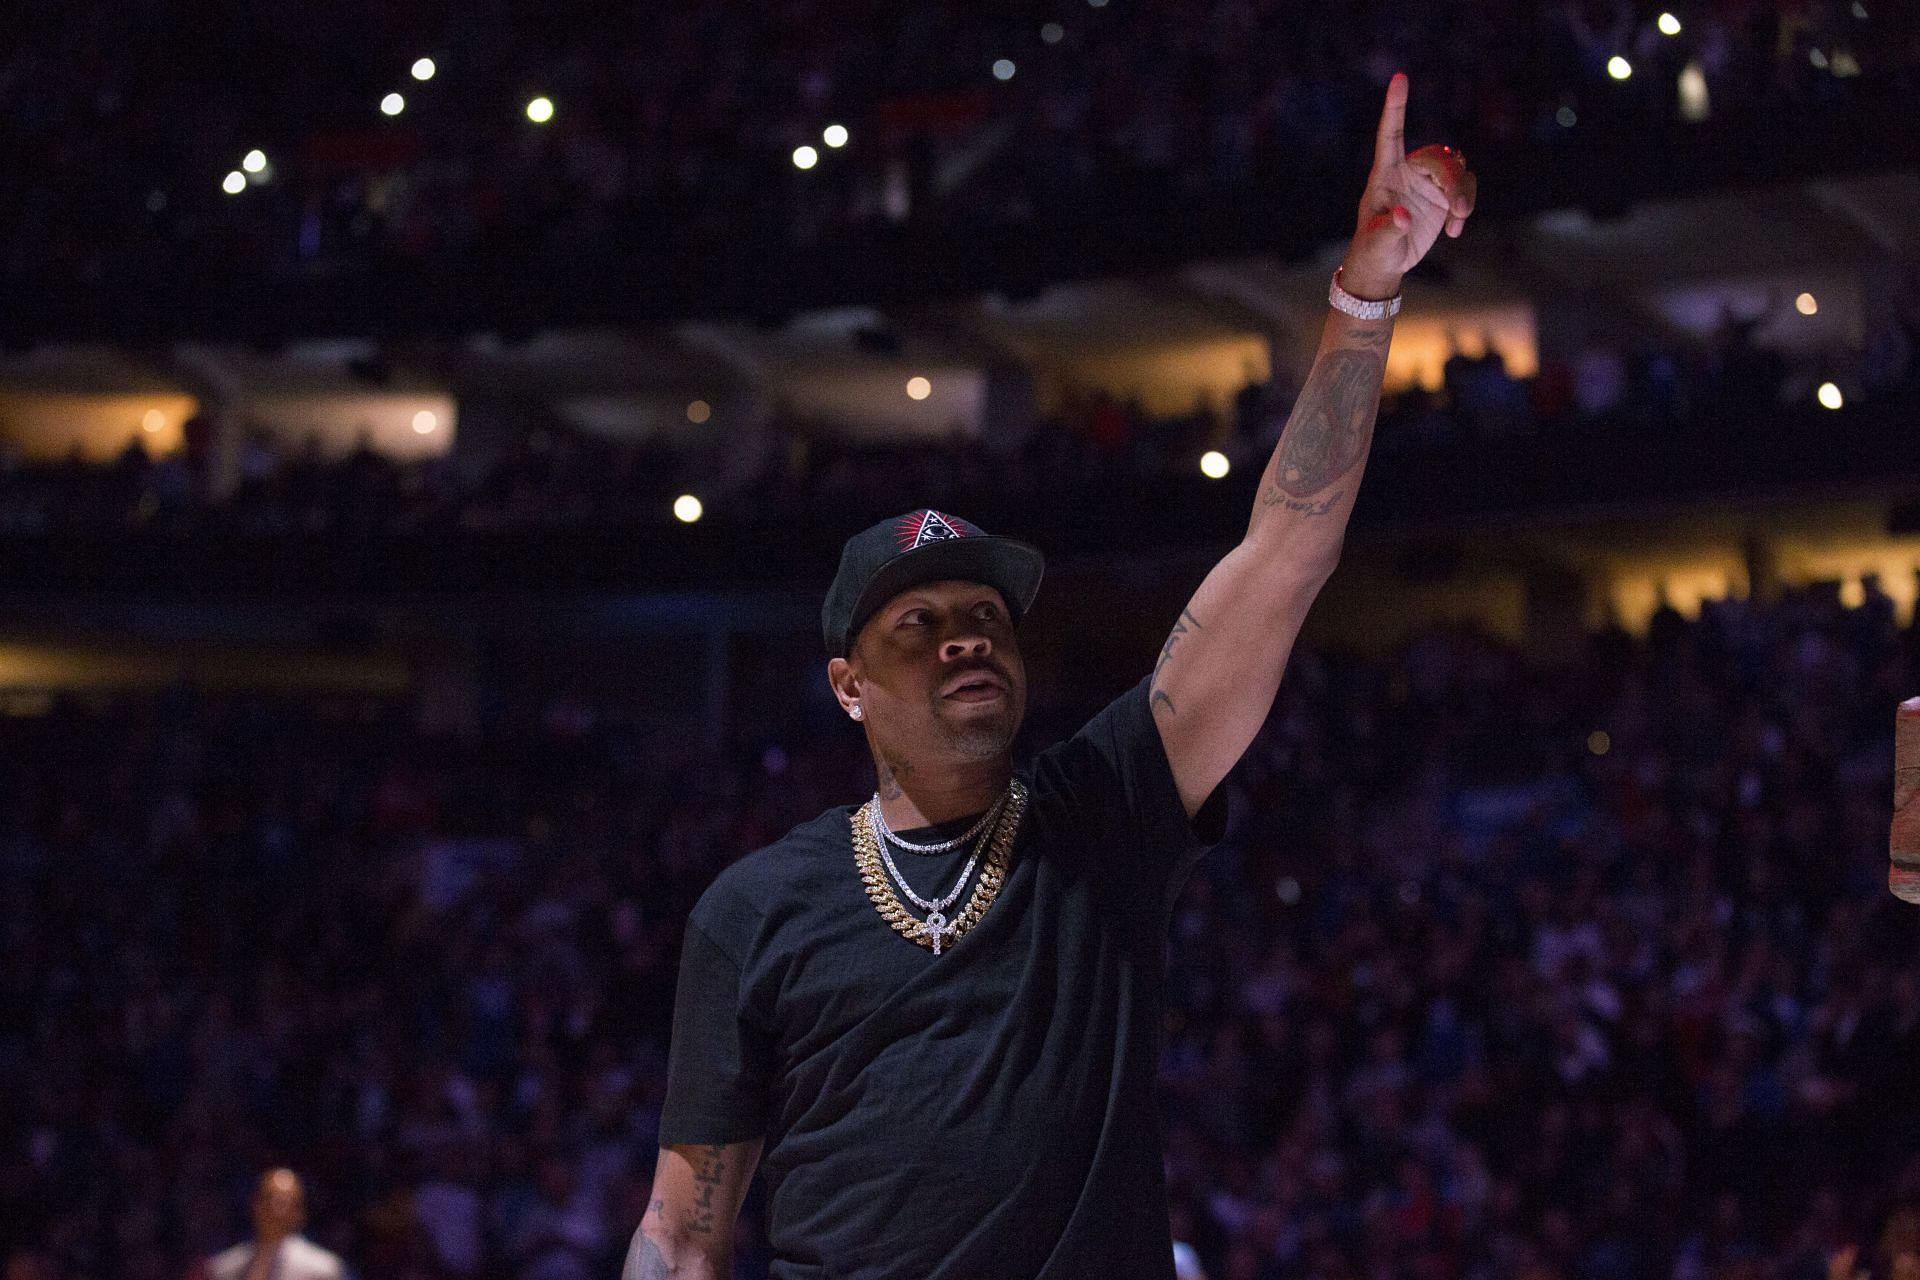 NBA hall of famer Allen Iverson salutes the crowd prior to the game between the Utah Jazz and Philadelphia 76ers at the Wells Fargo Center on November 16, 2018 in Philadelphia, Pennsylvania.